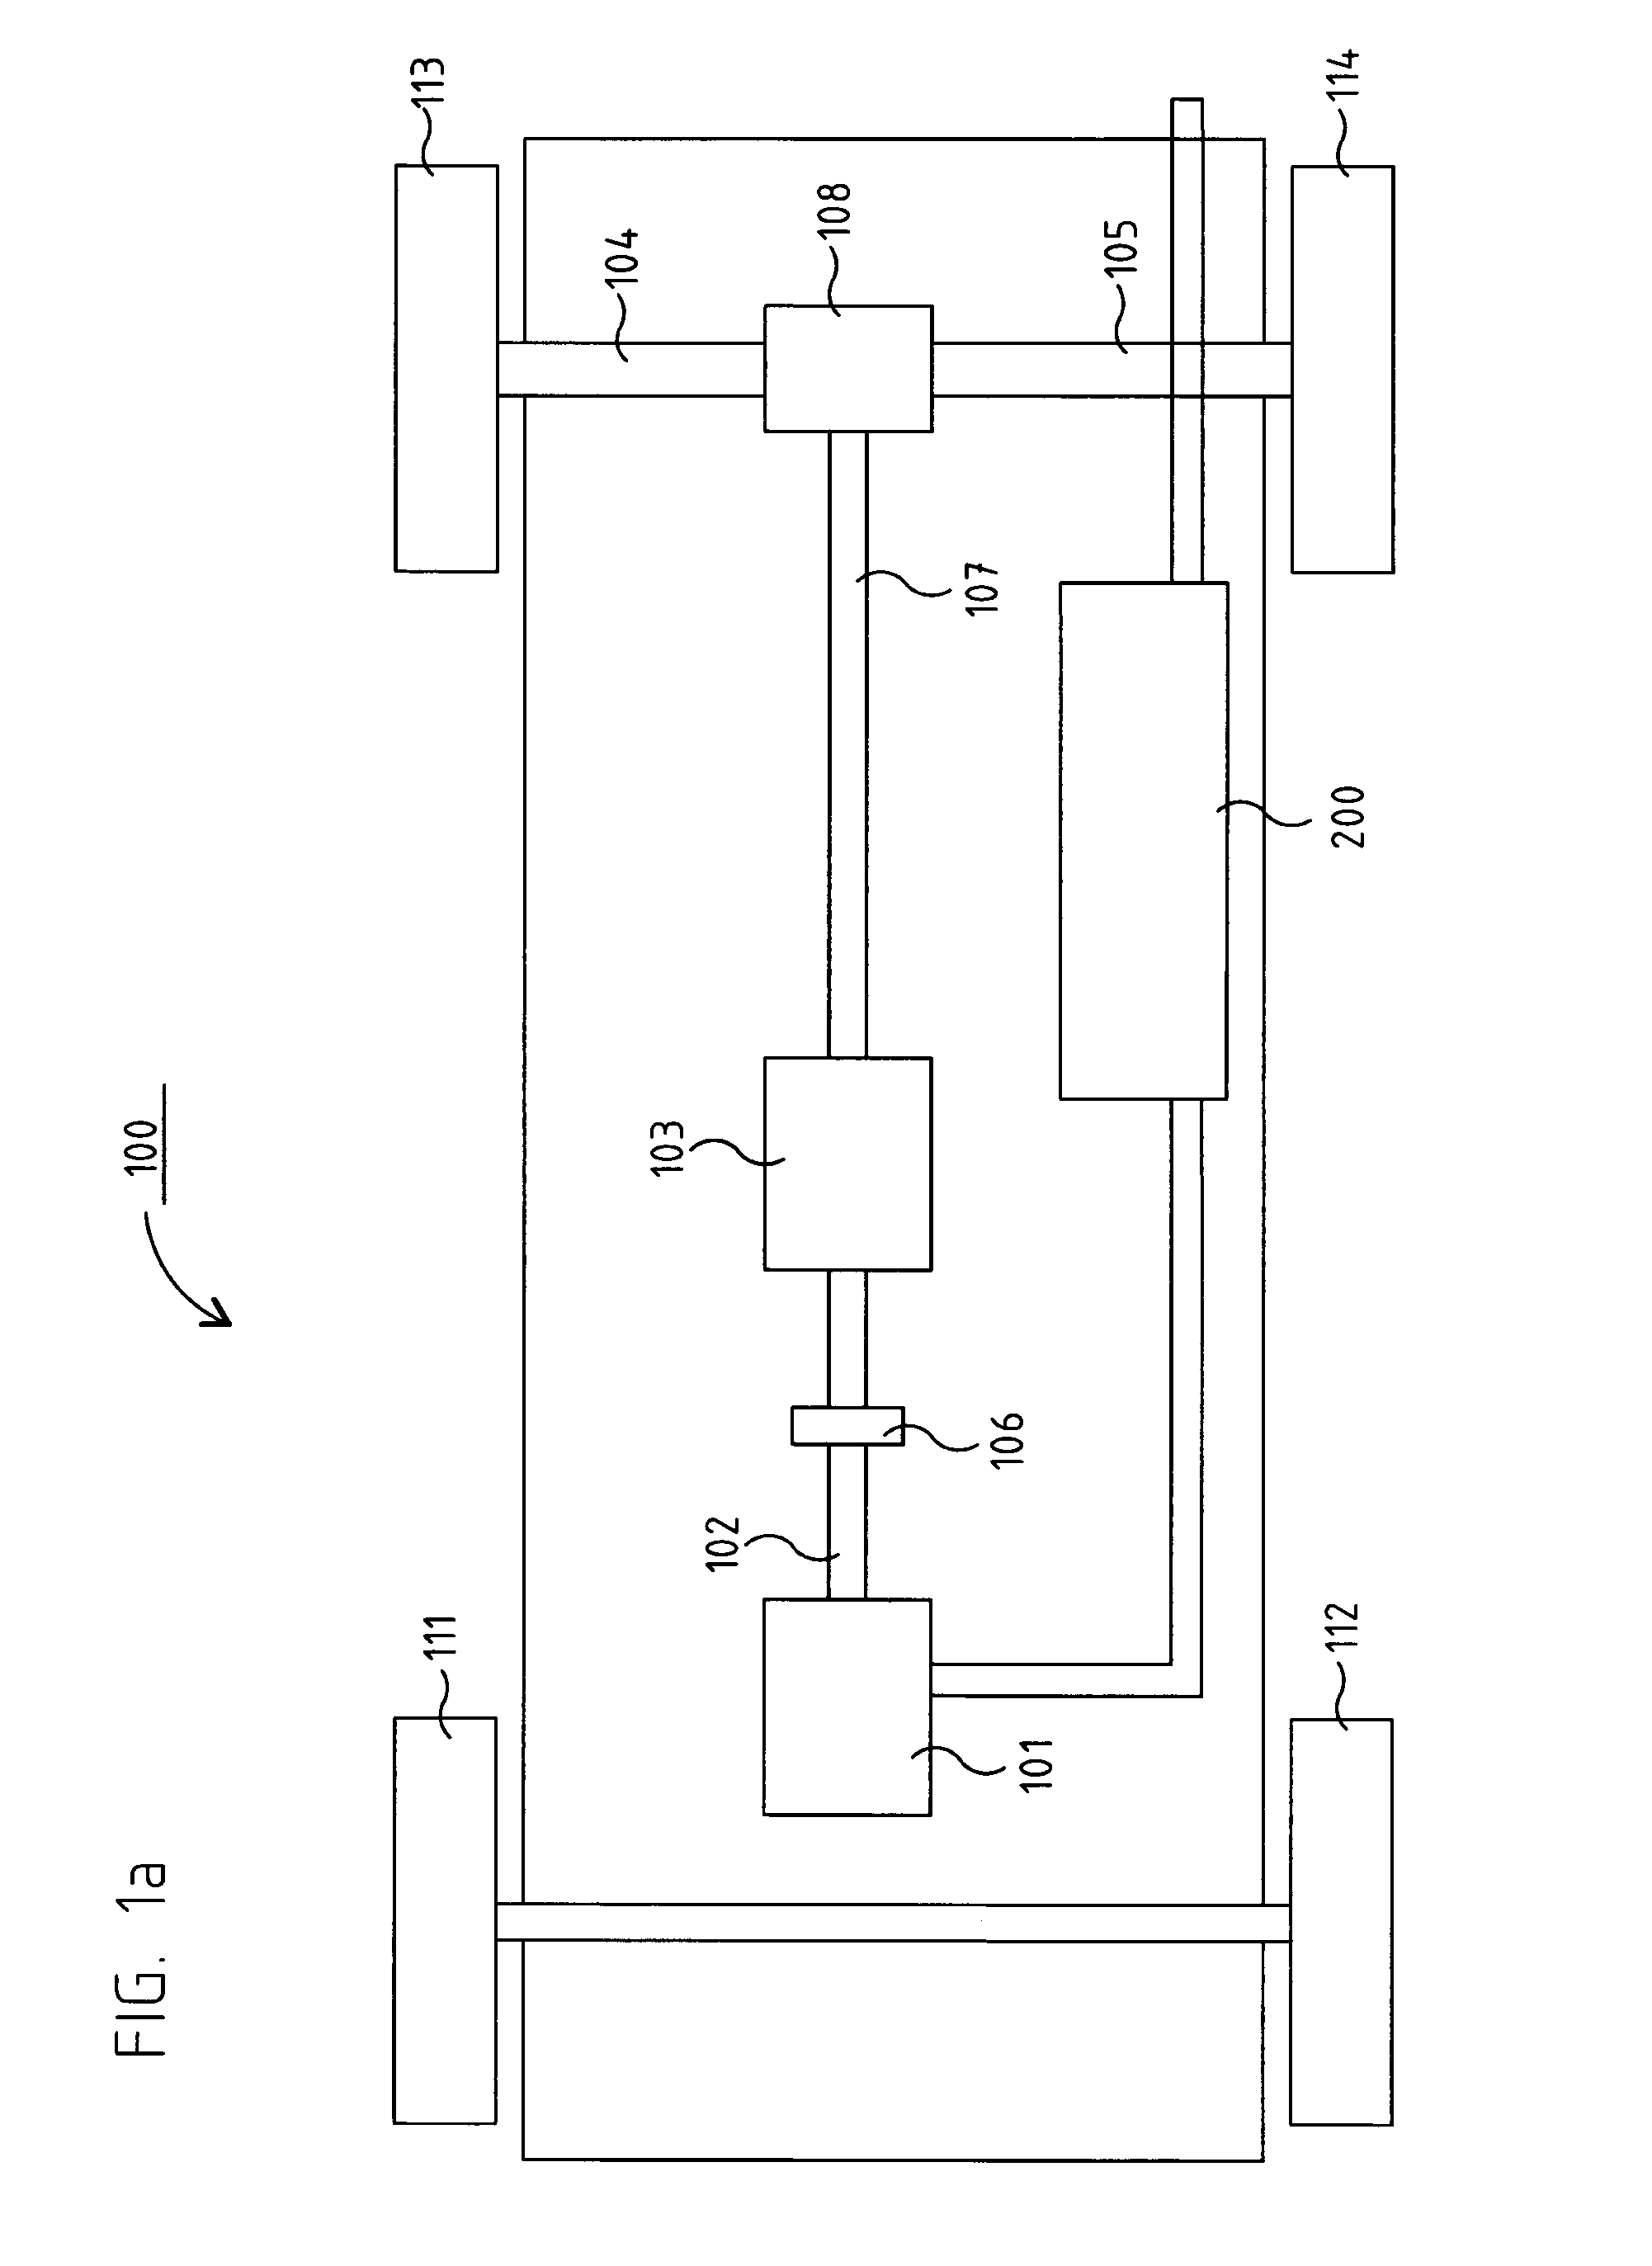 Method and system for exhaust cleaning